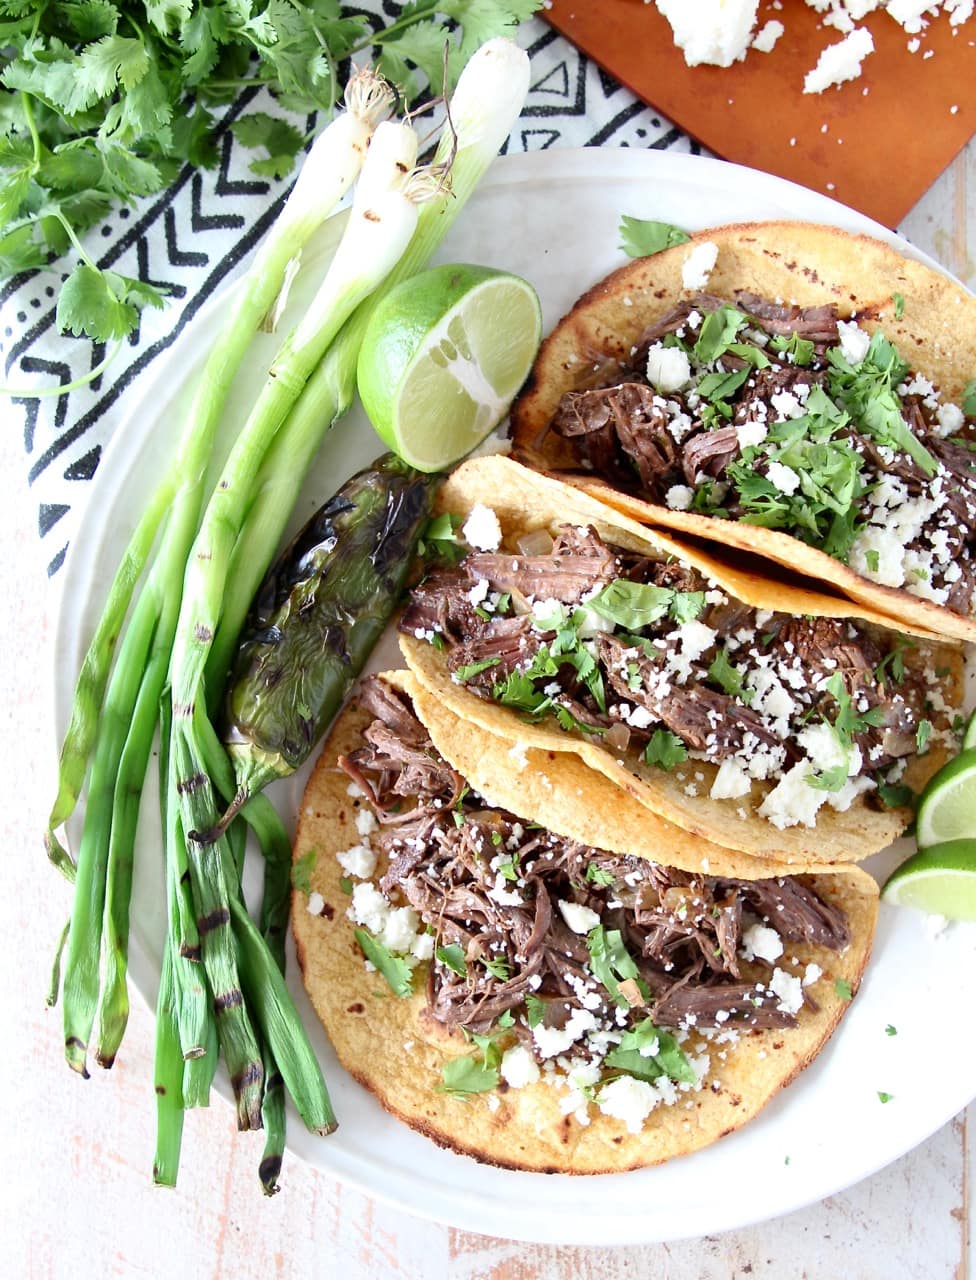 Slow Cooker Shredded Beef Barbacoa Tacos in Corn Tortillas with Grilled Green Onions, Jalapeno and Lime